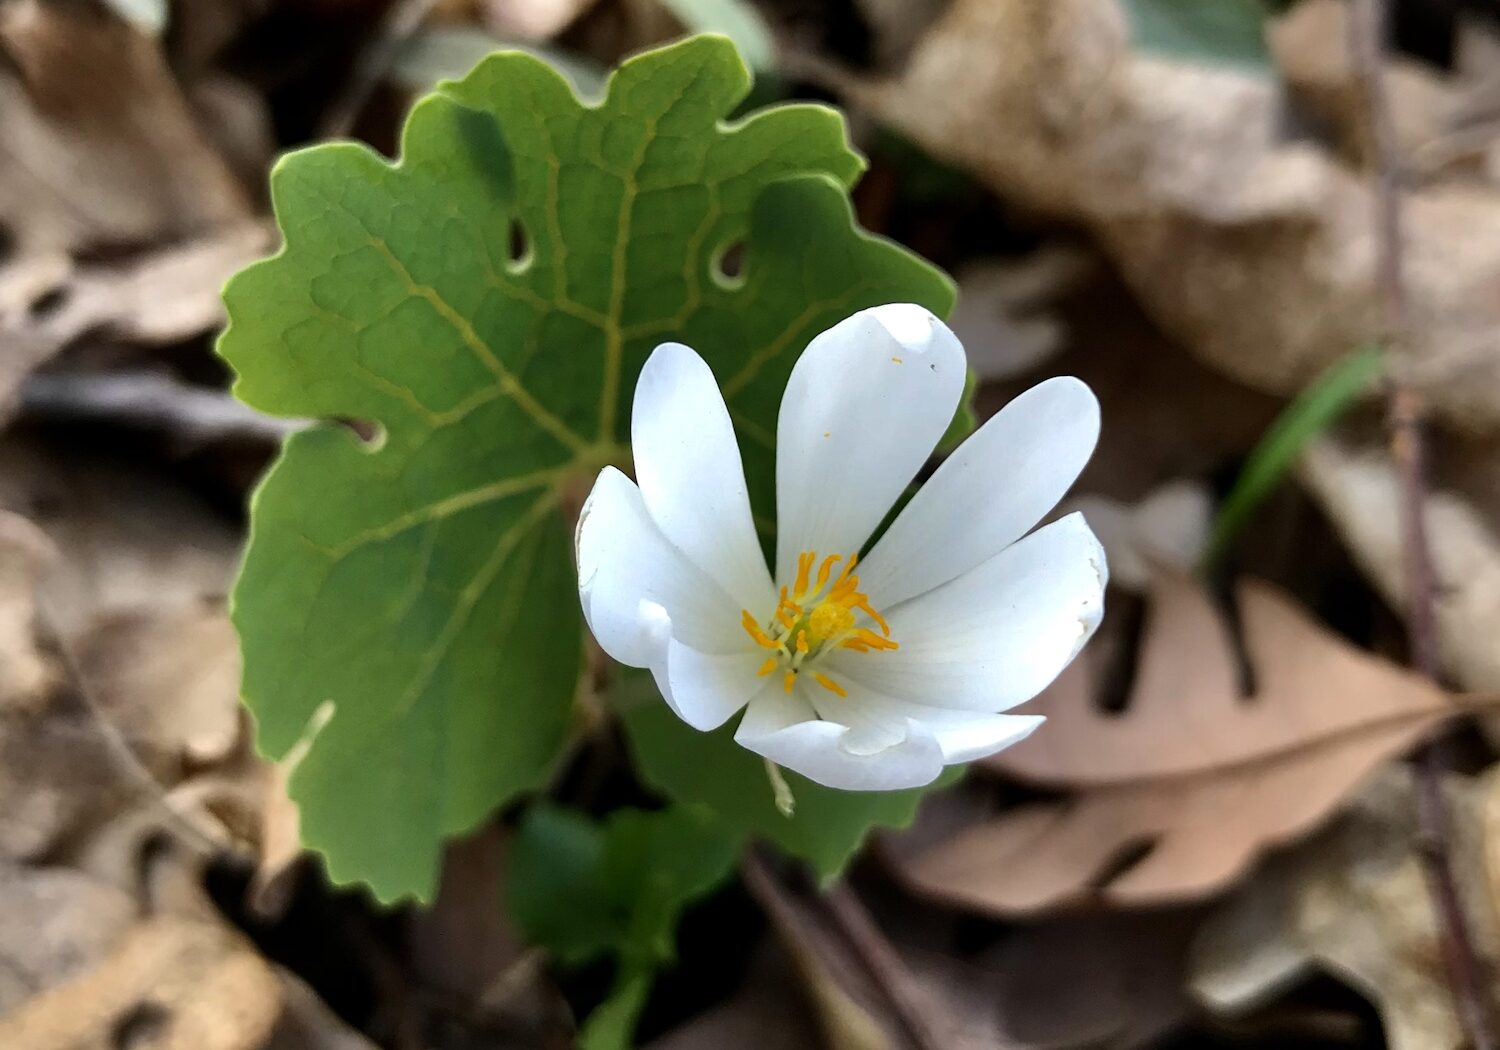 Canada bloodroot, Sanguinaria canadensis, a harbinger of spring in the upper Midwest